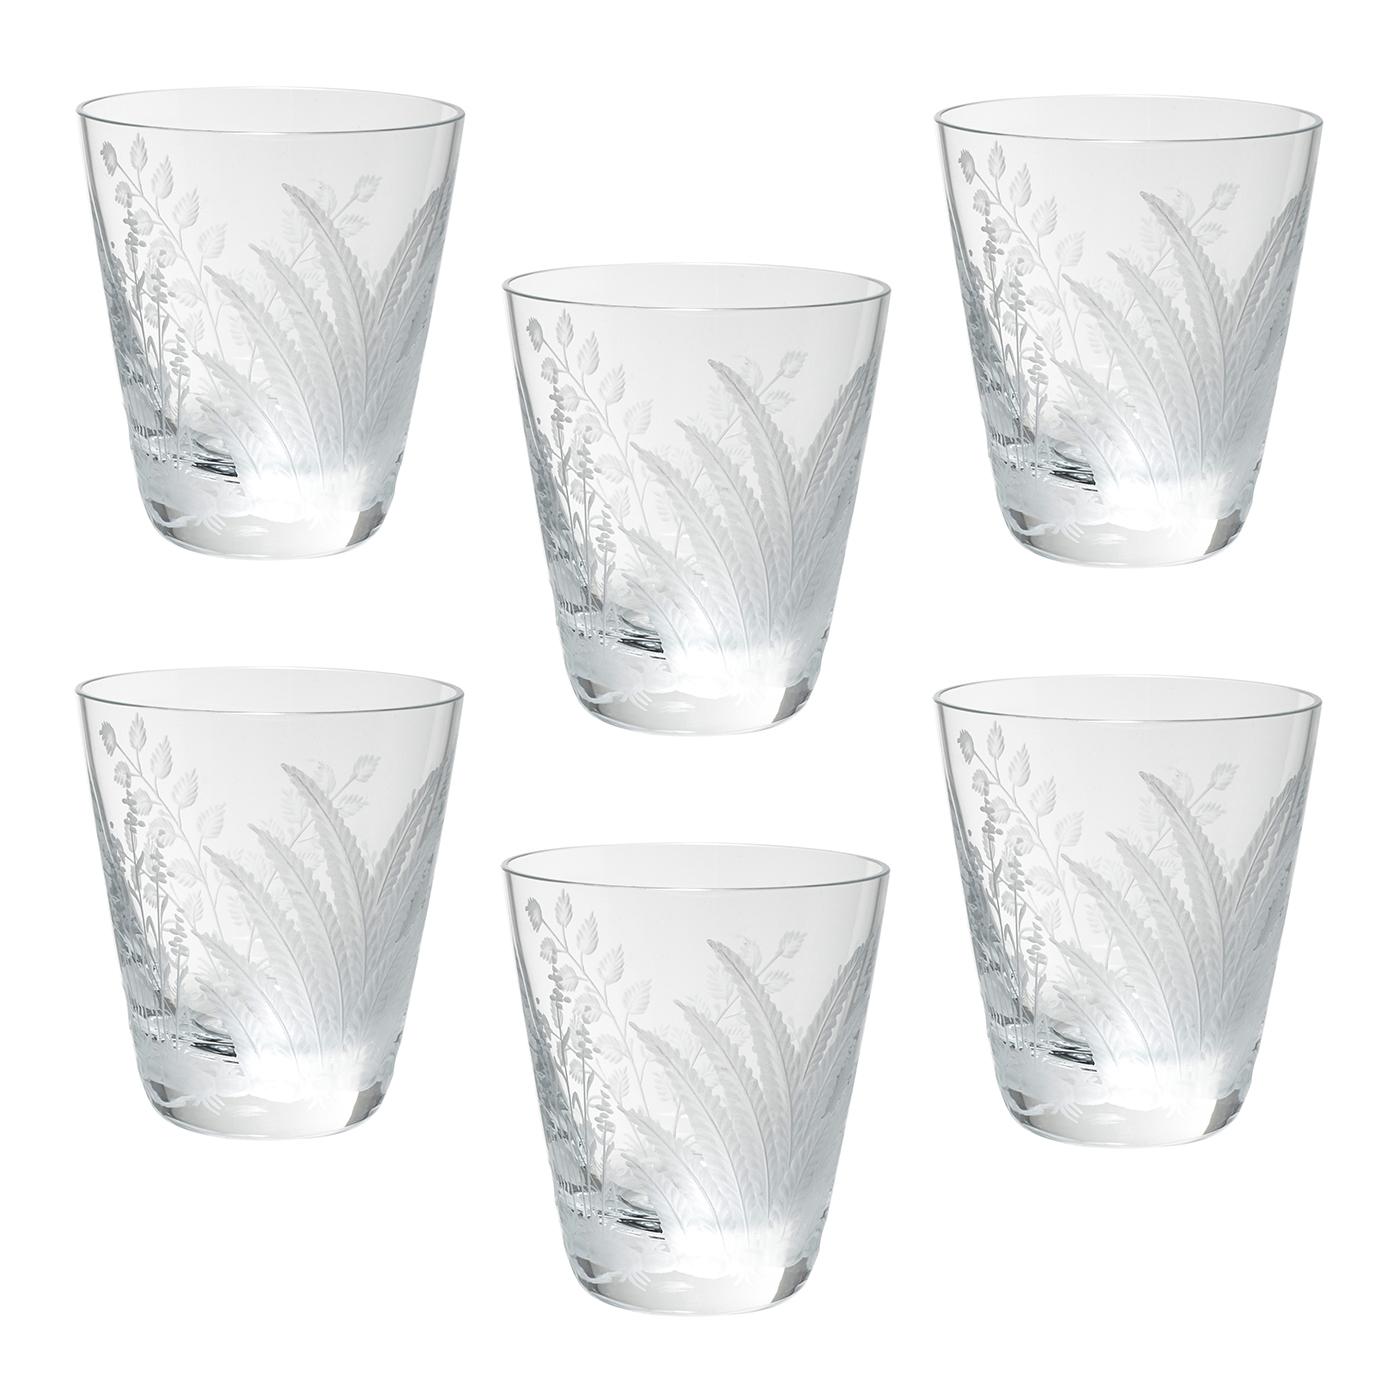 Set of 6 hand blown tumblers in clear crystal with a country style fern decor hand-engraved all around. A matching carafe can be ordered in addition. Can be ordered in different colors. Produced by Sofina Boutique Kitzbühel Austria
About Sofina